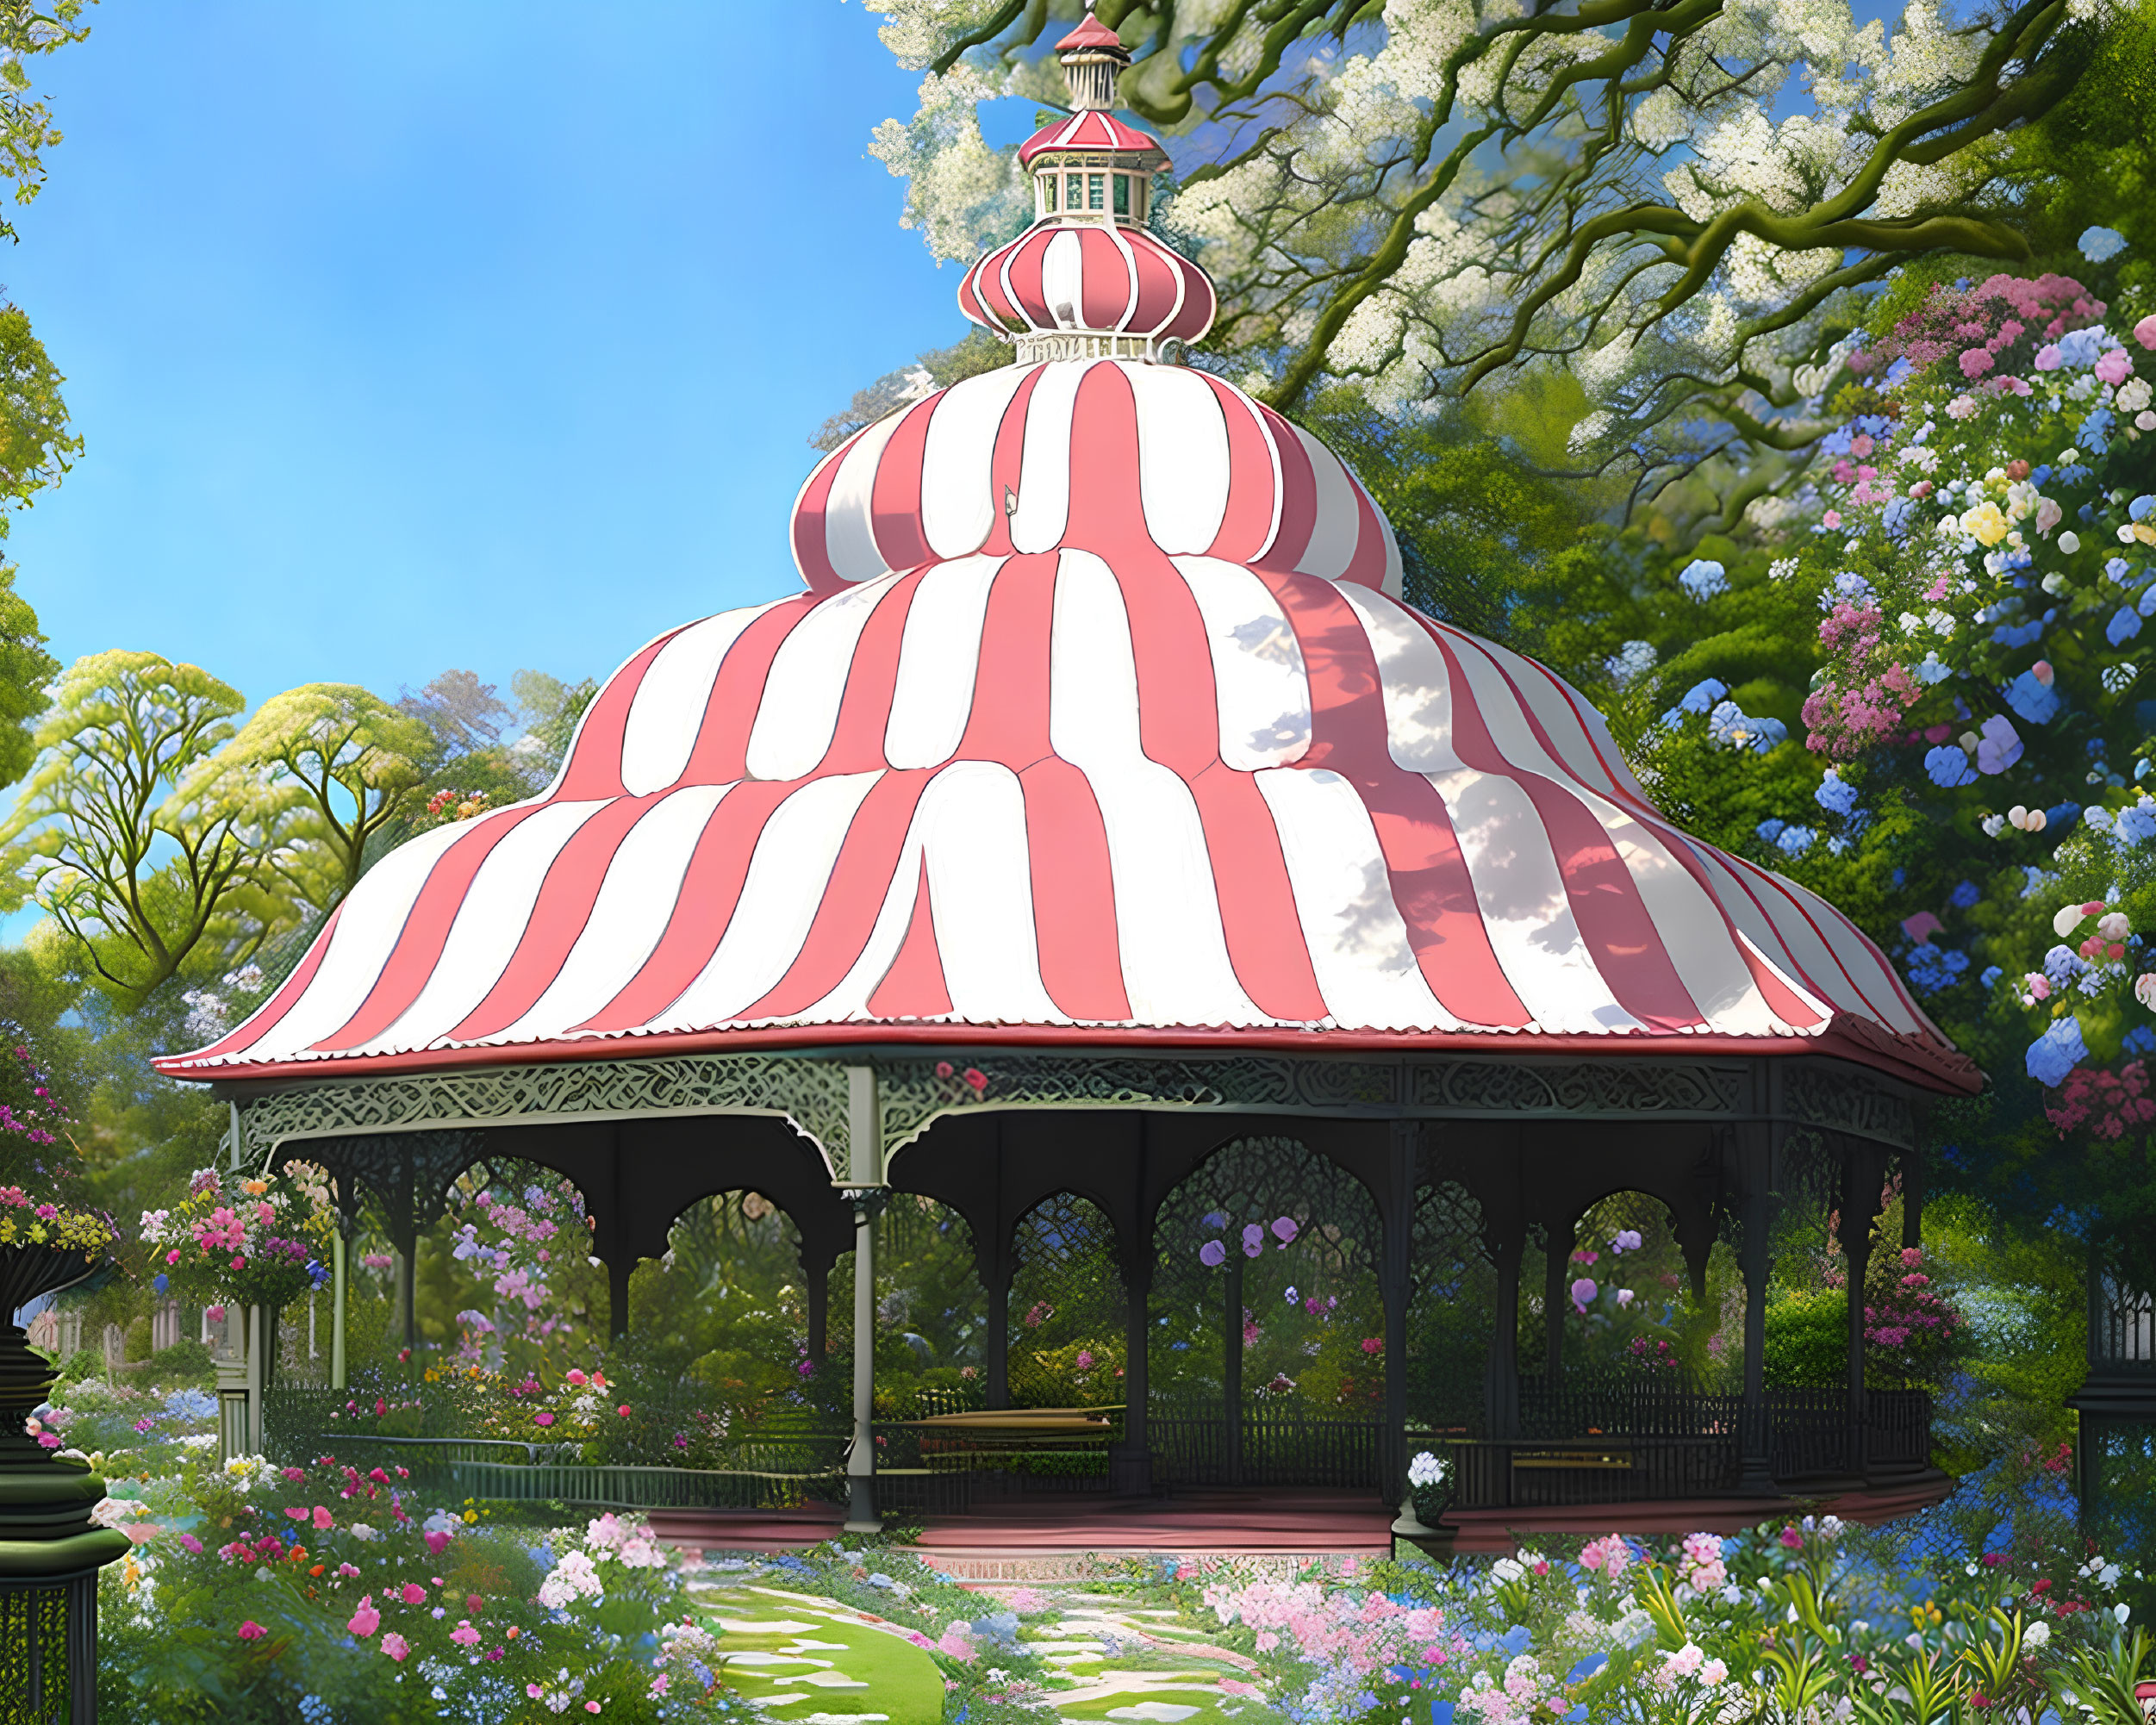 Whimsical Gazebo with Red & White Striped Roof in Lush Garden